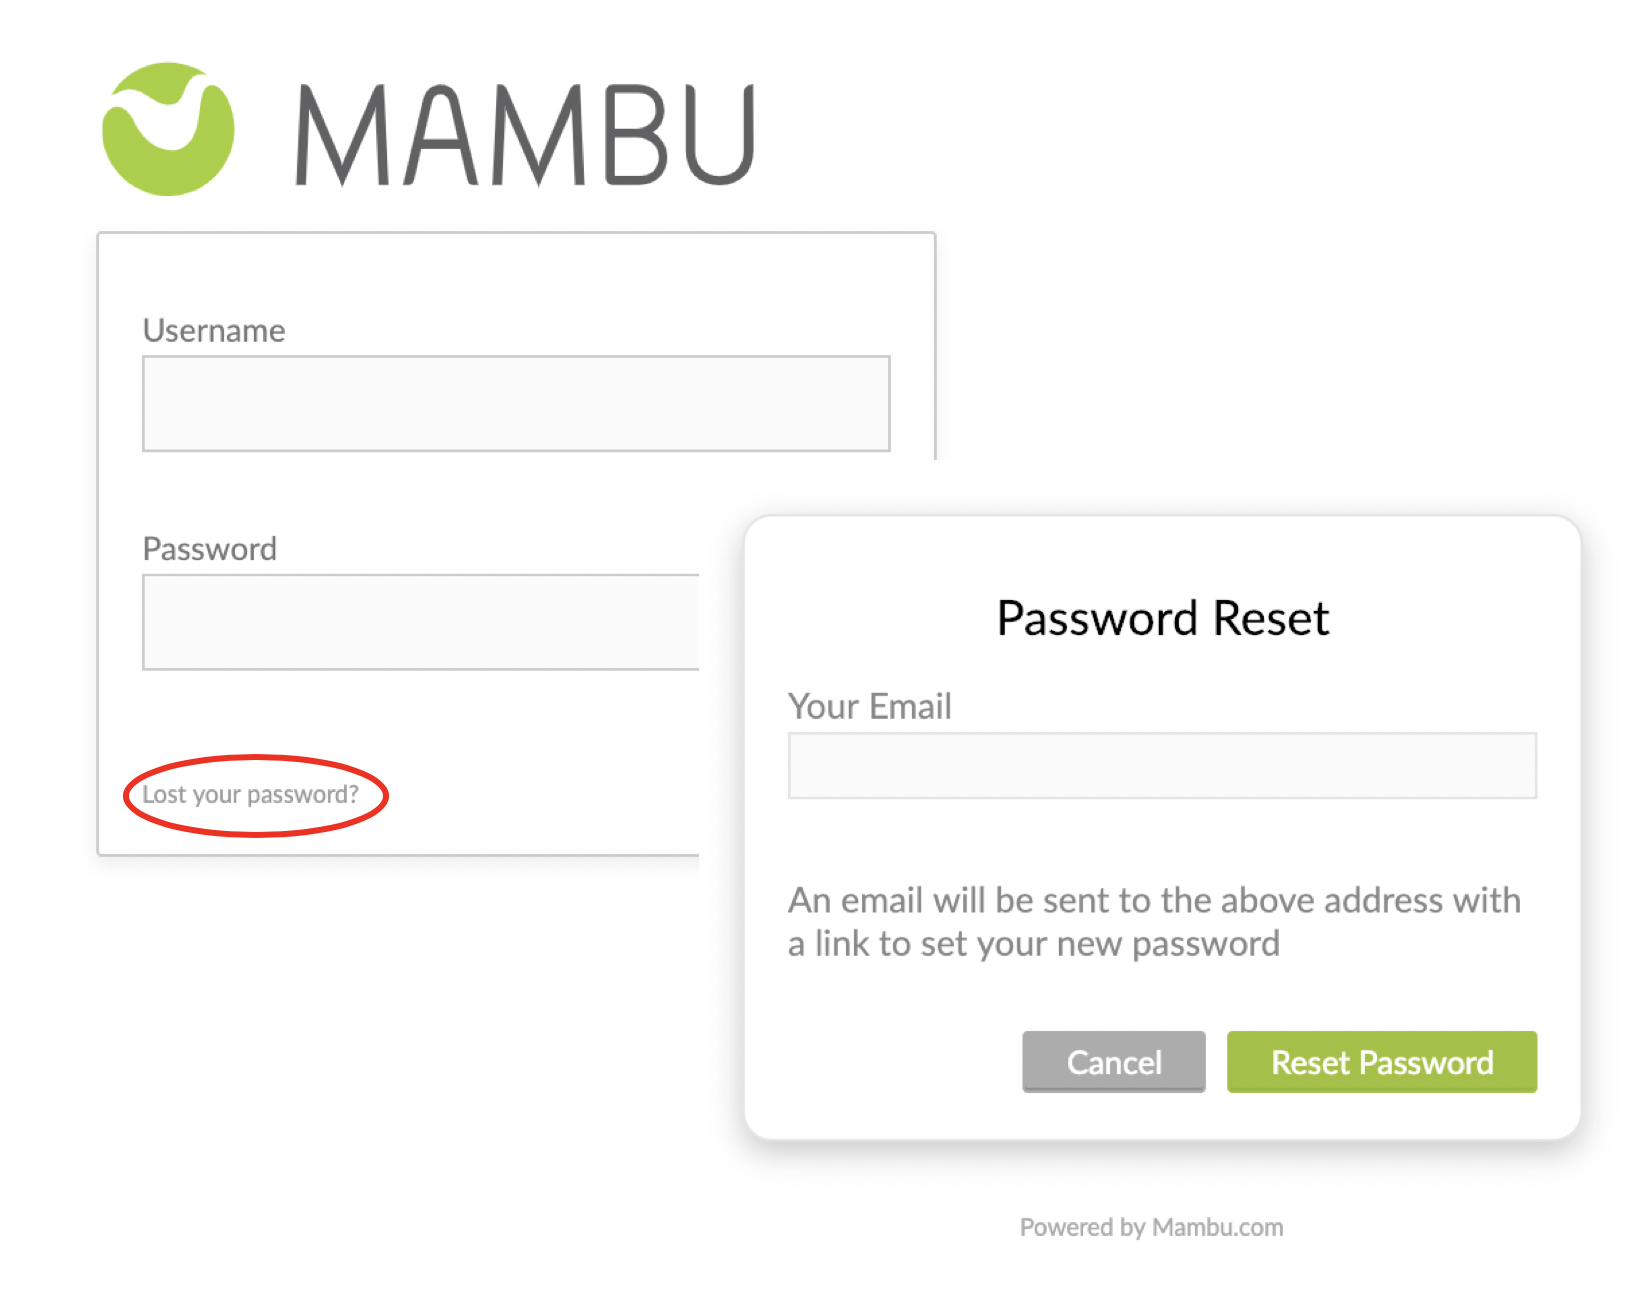 Reset your password screen. An email will be sent to the provided email address . with a link to set the new password.